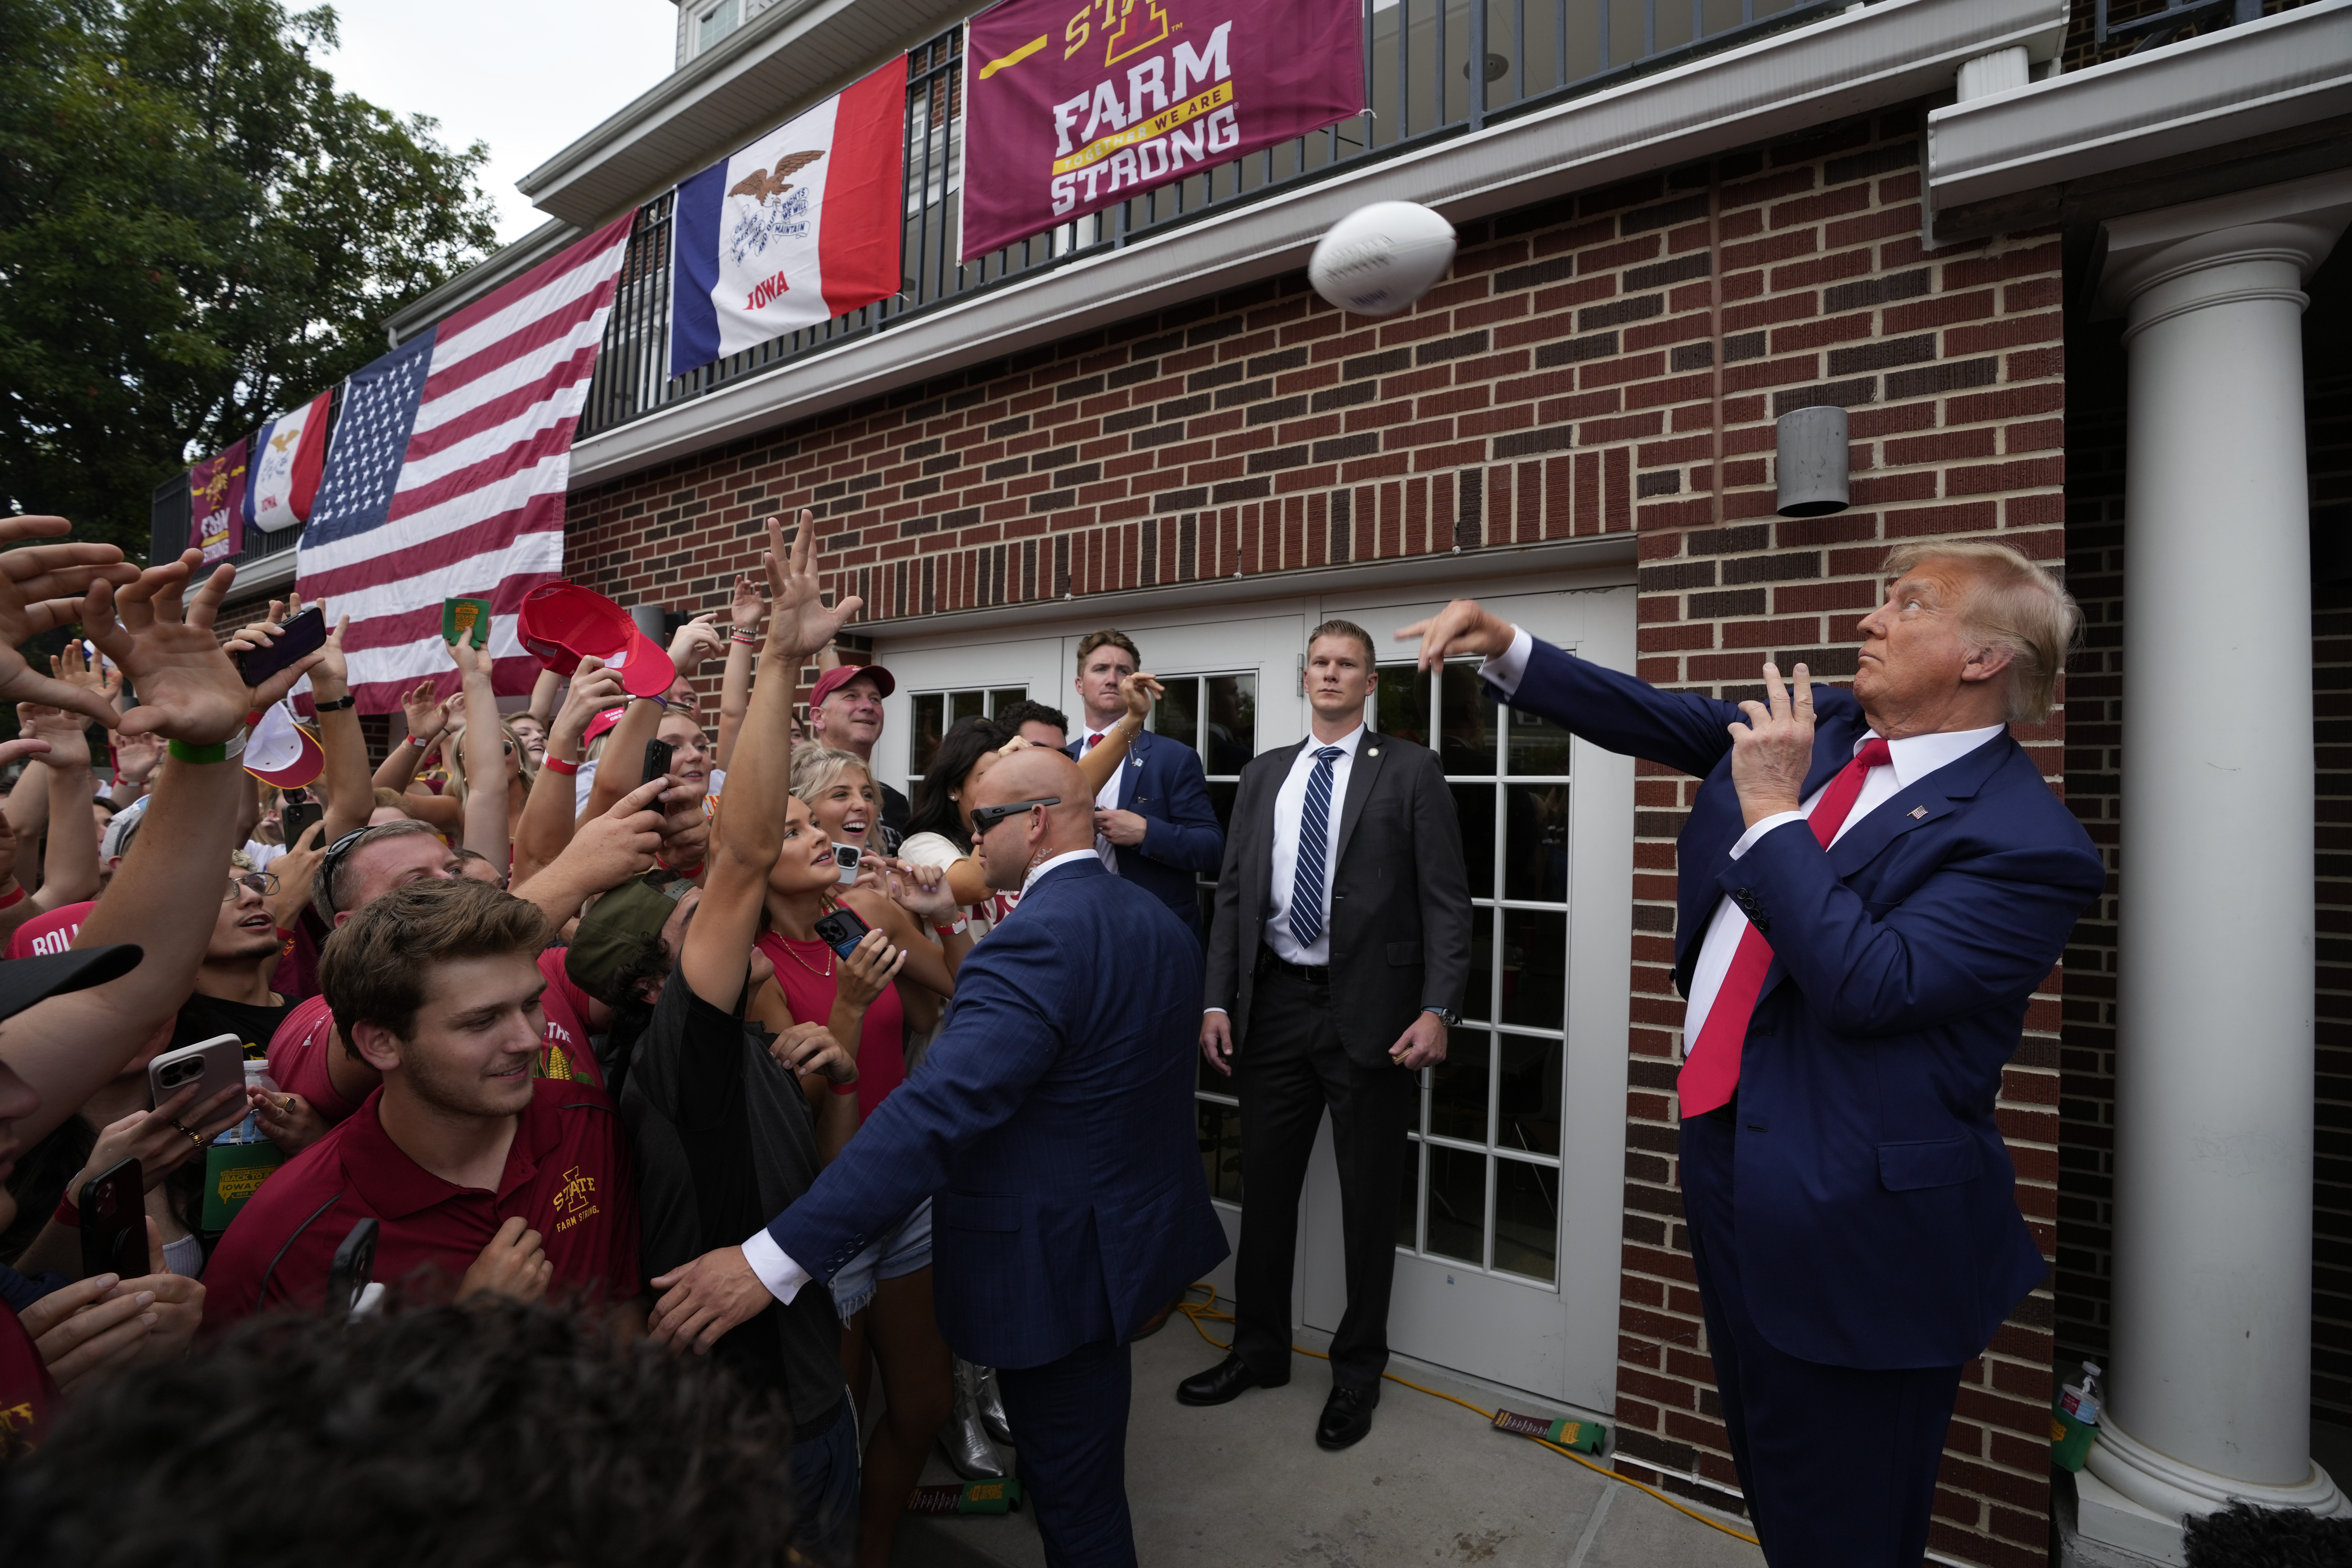 Trump stops at a fraternity house on his way to Iowa-Iowa State football game, outdrawing his rivals picture